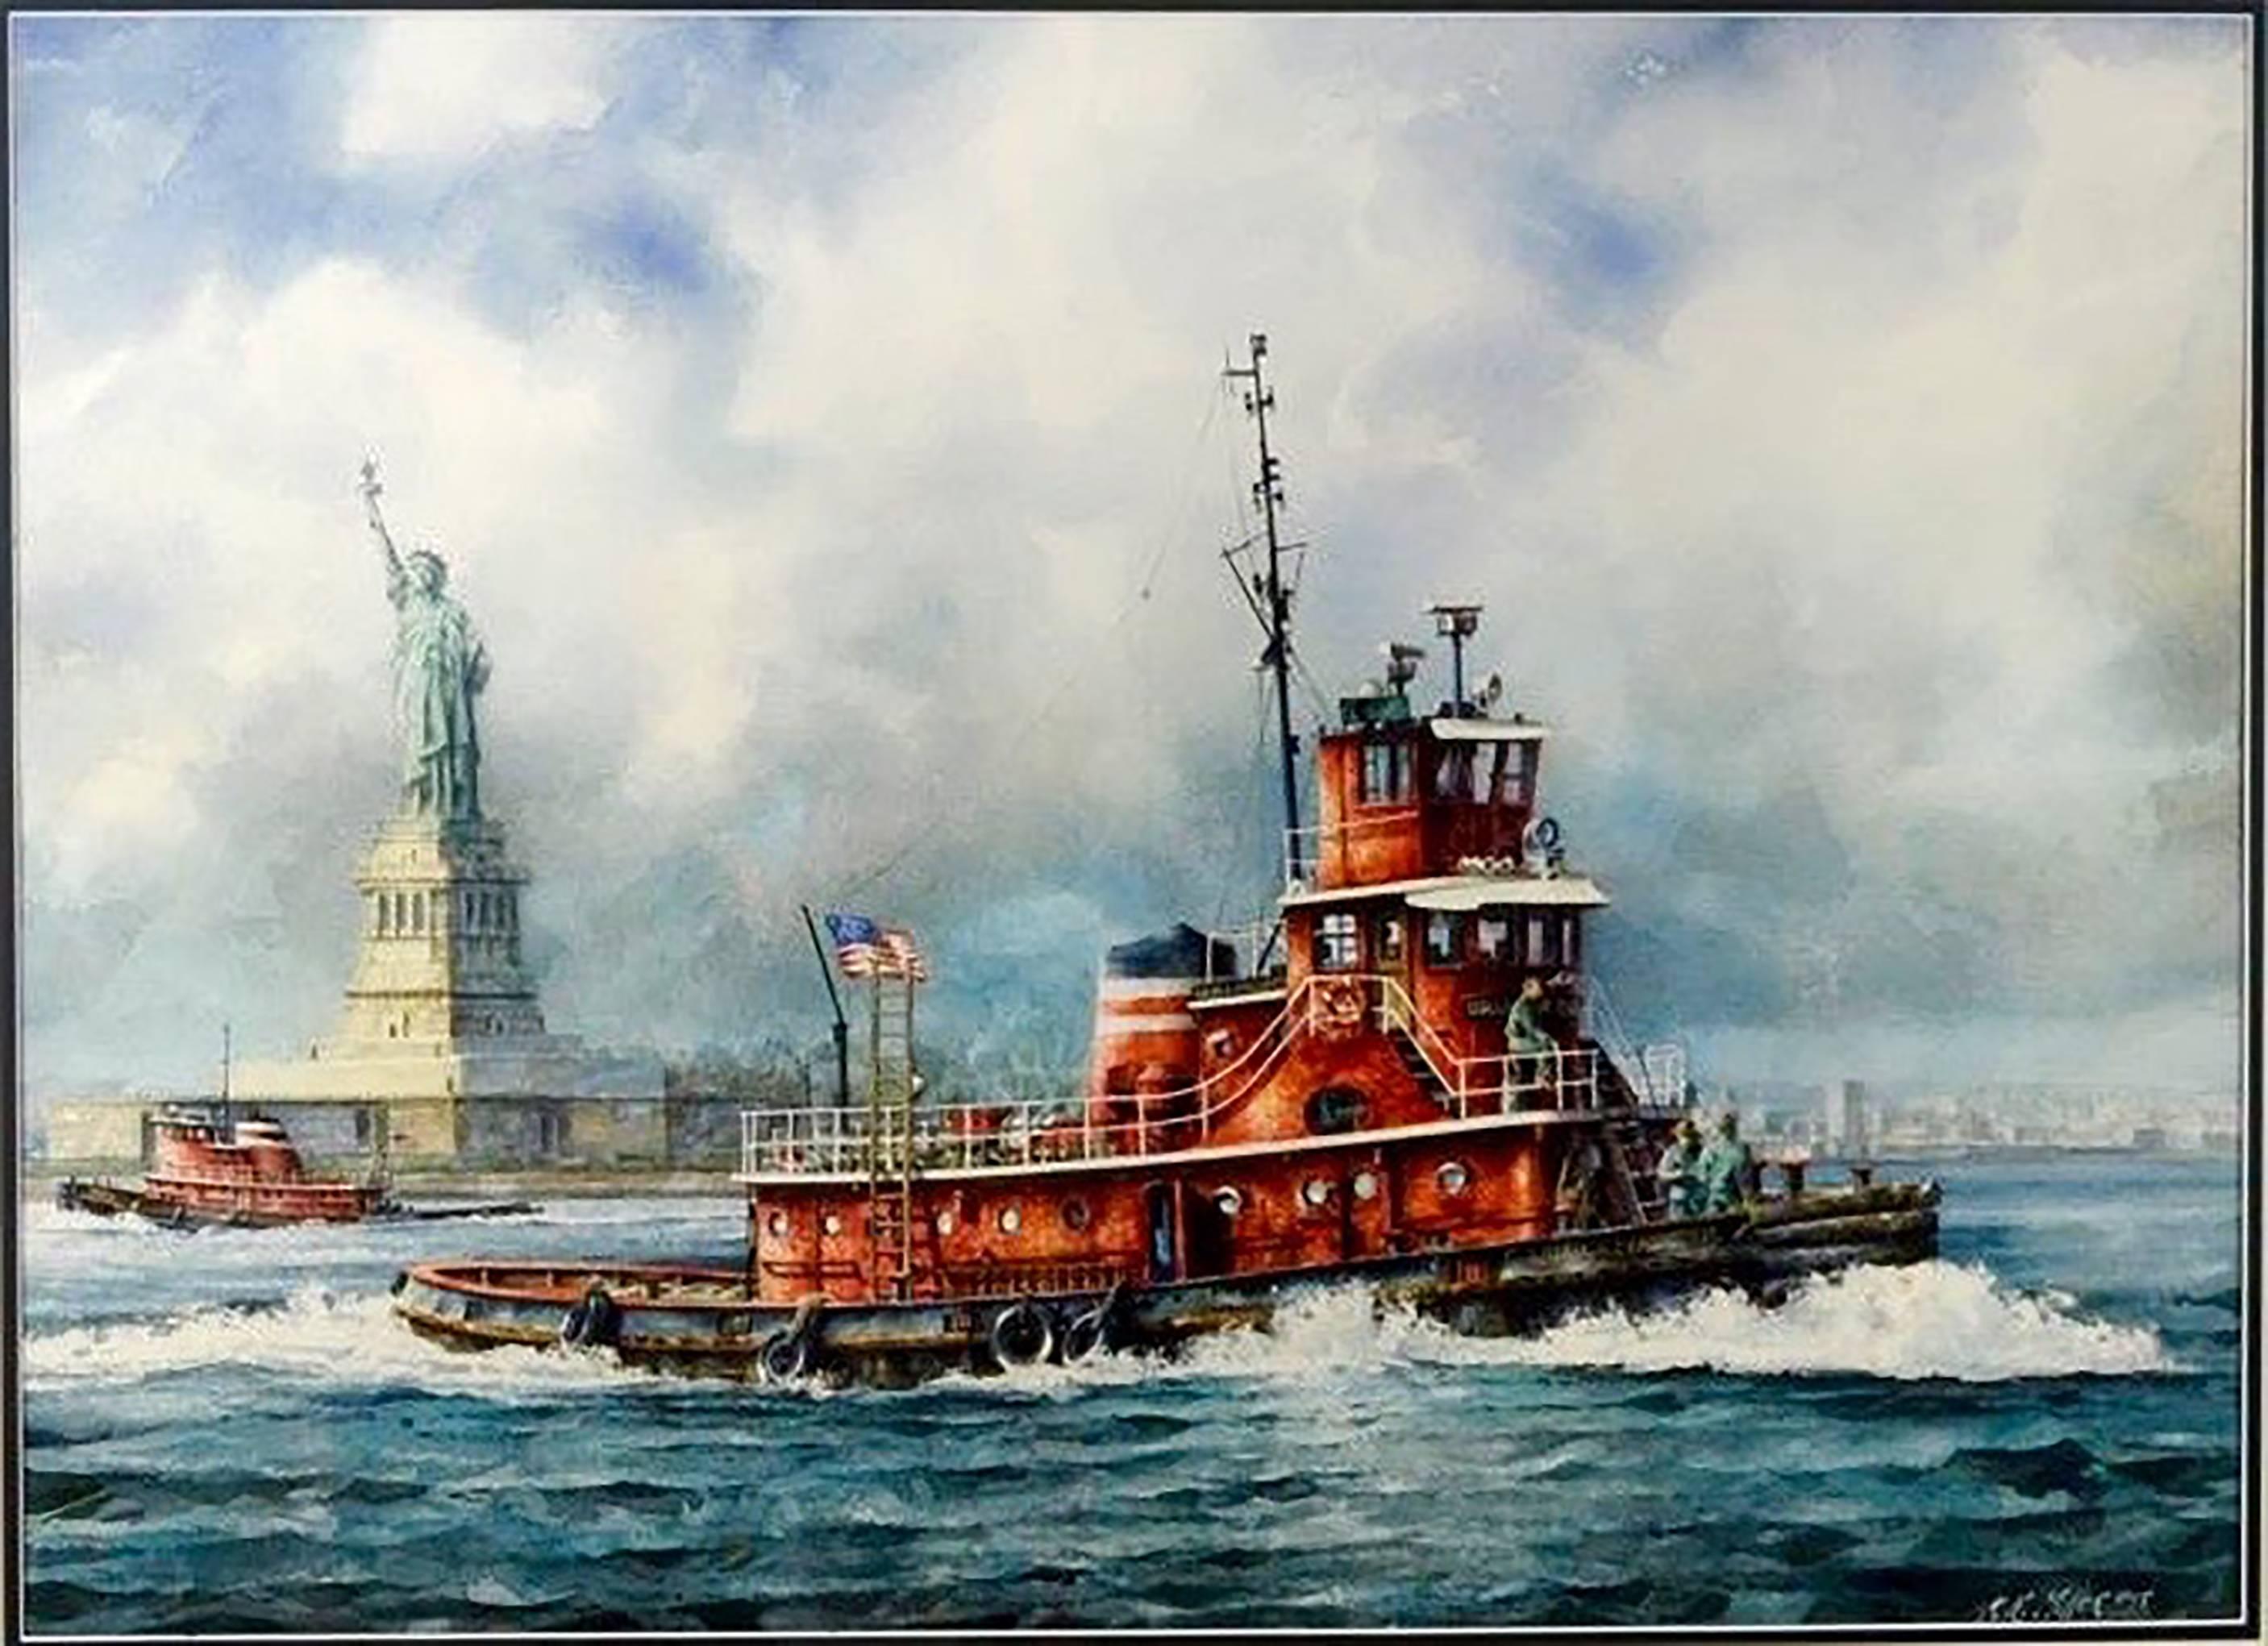 Keith Miller Landscape Art - The Tug Boat Brian McAllister off Liberty Island with Statue of Liberty in 